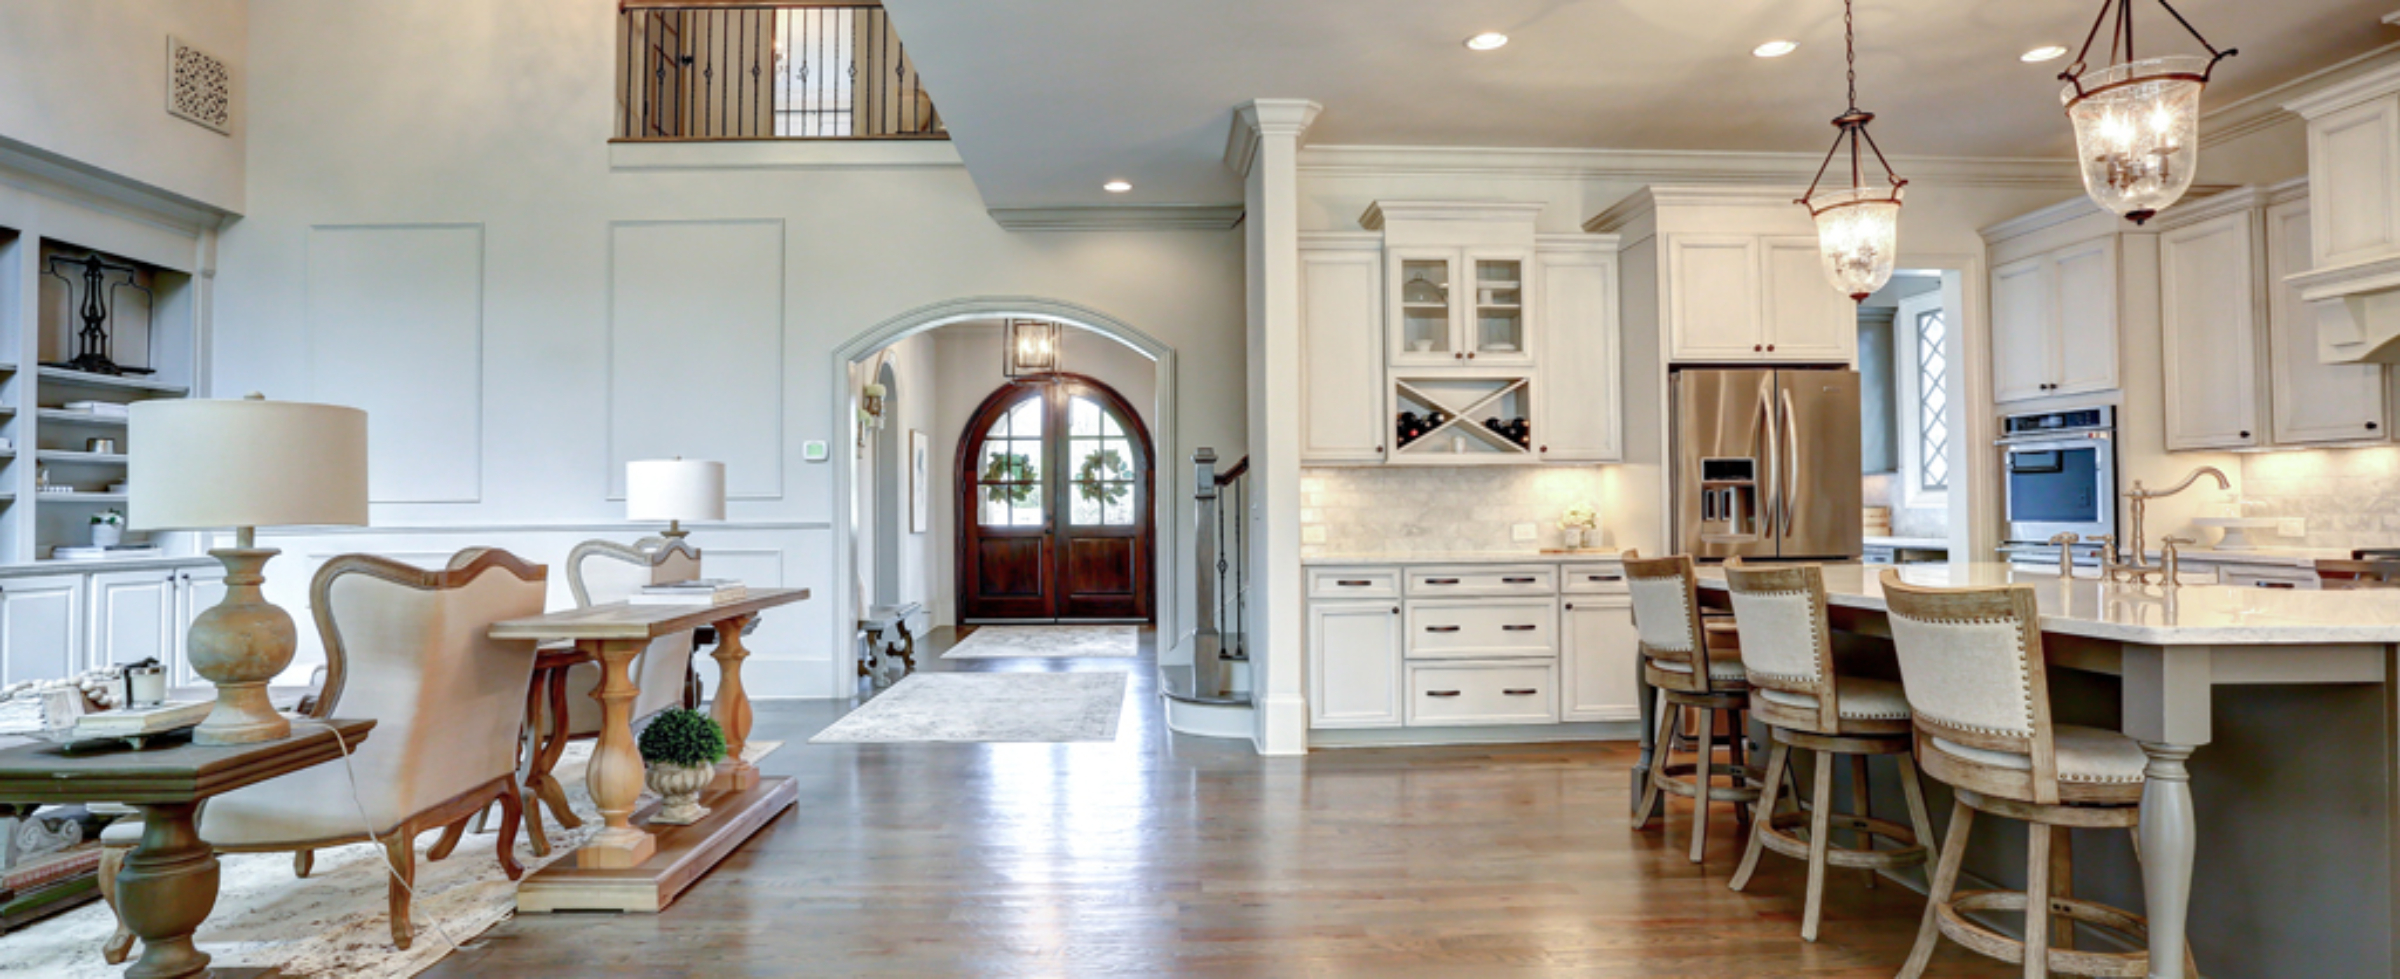 french-tudor-kitchen-and arched-foyer